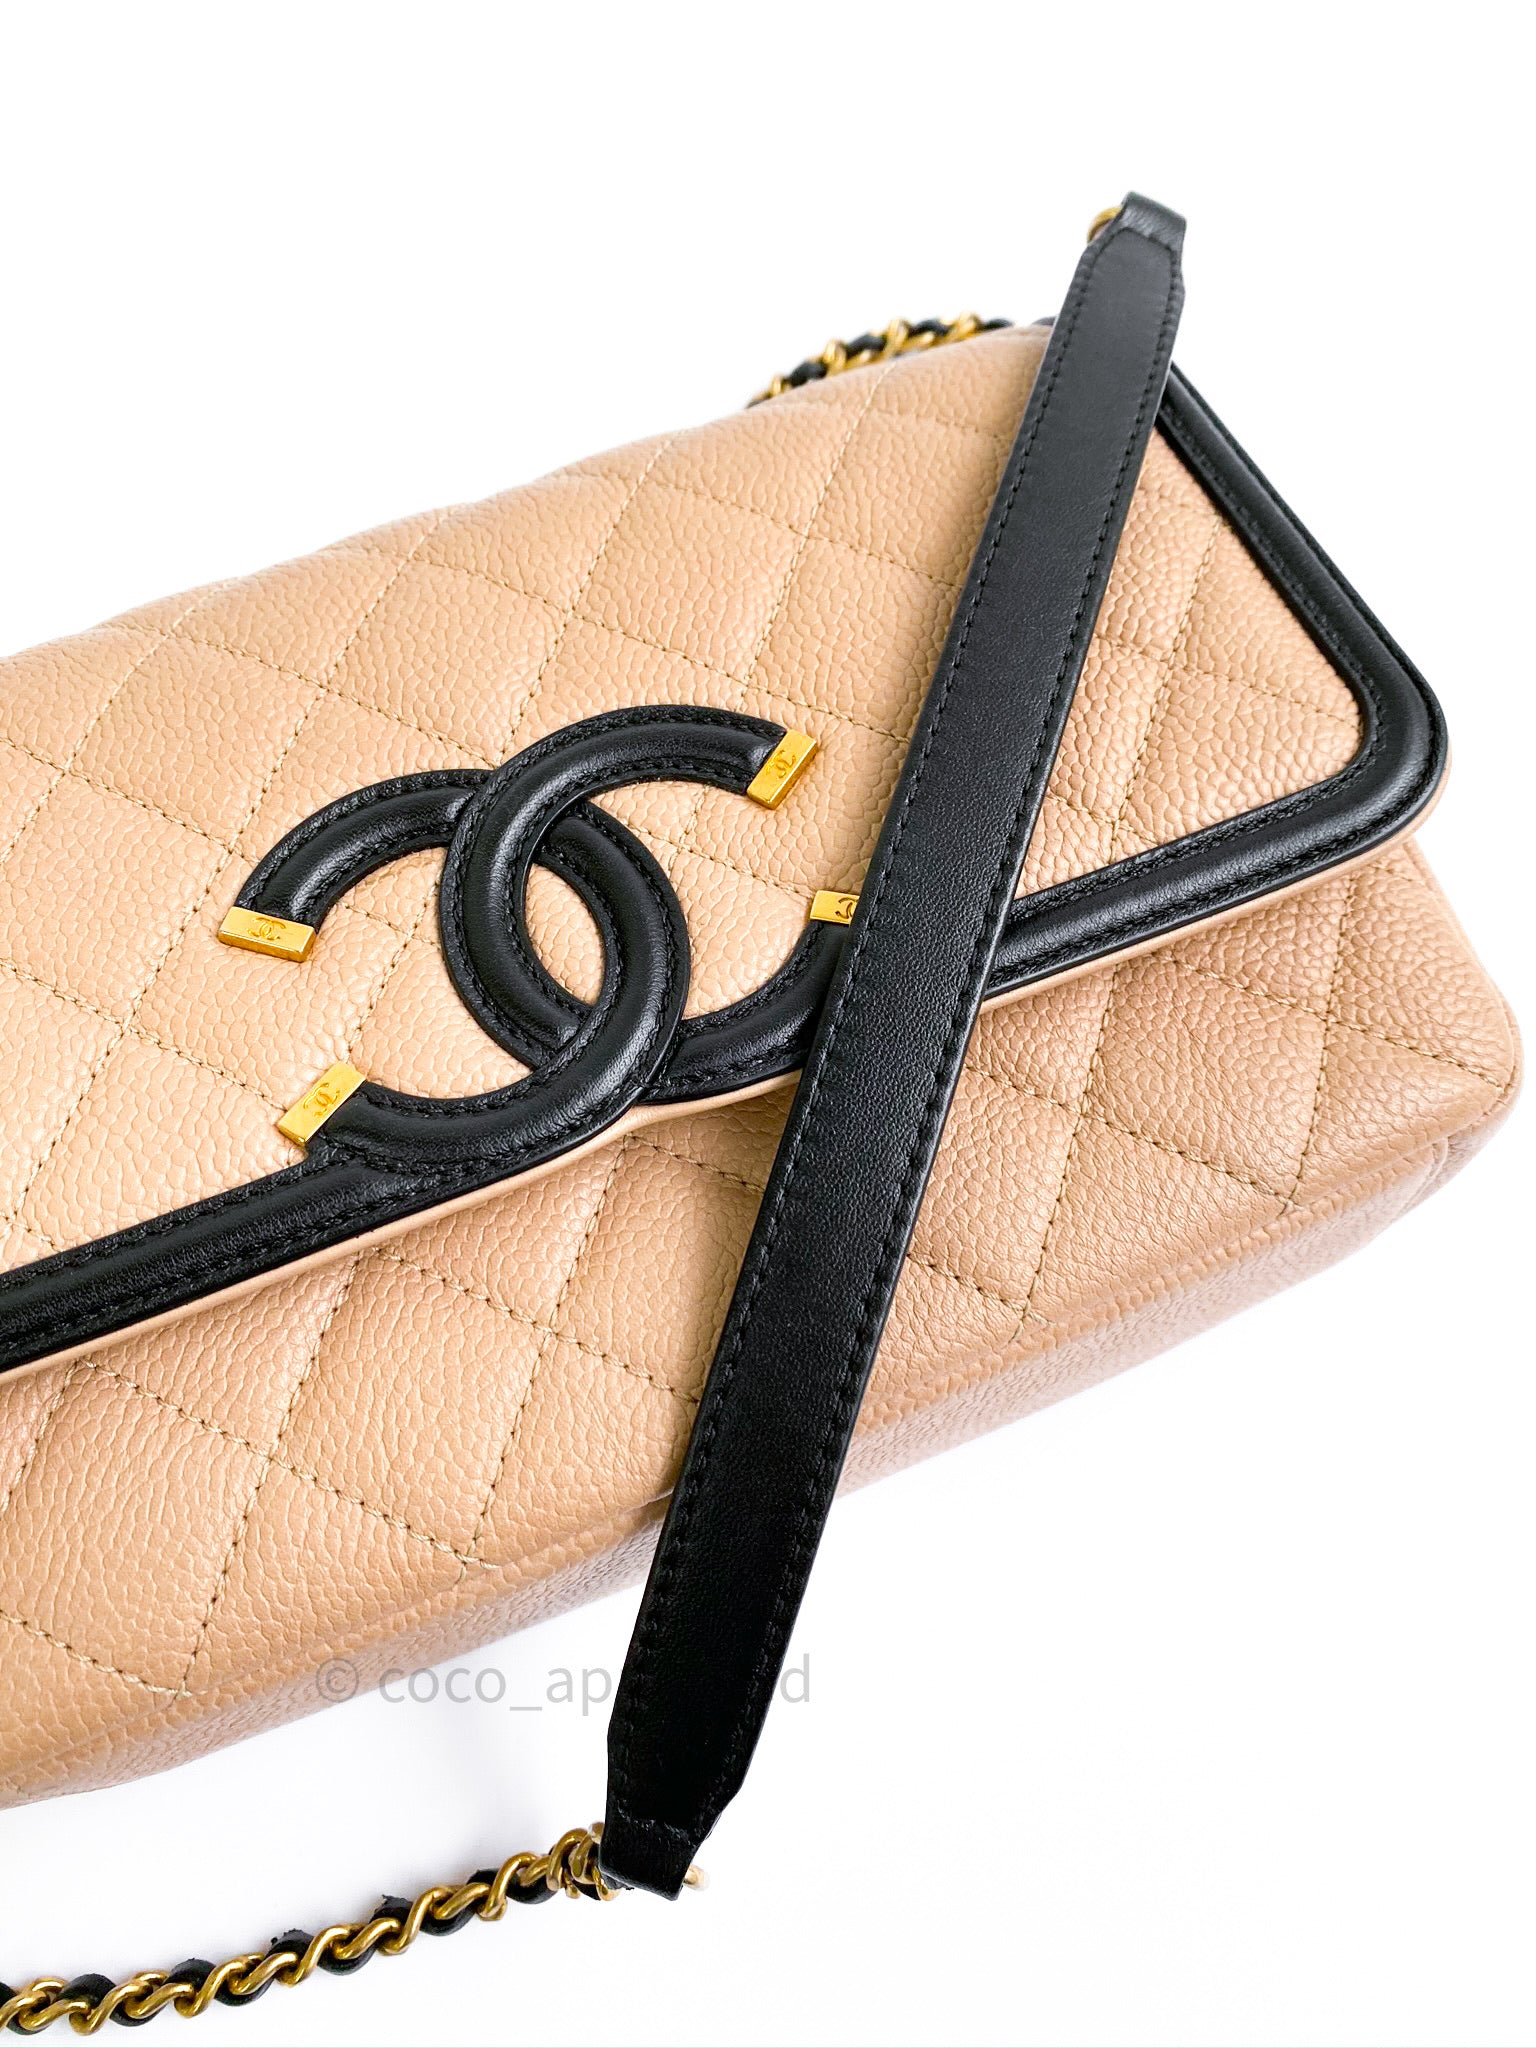 CHANEL, Bags, Chanel Caviar Quilted Round Filigree Crossbody